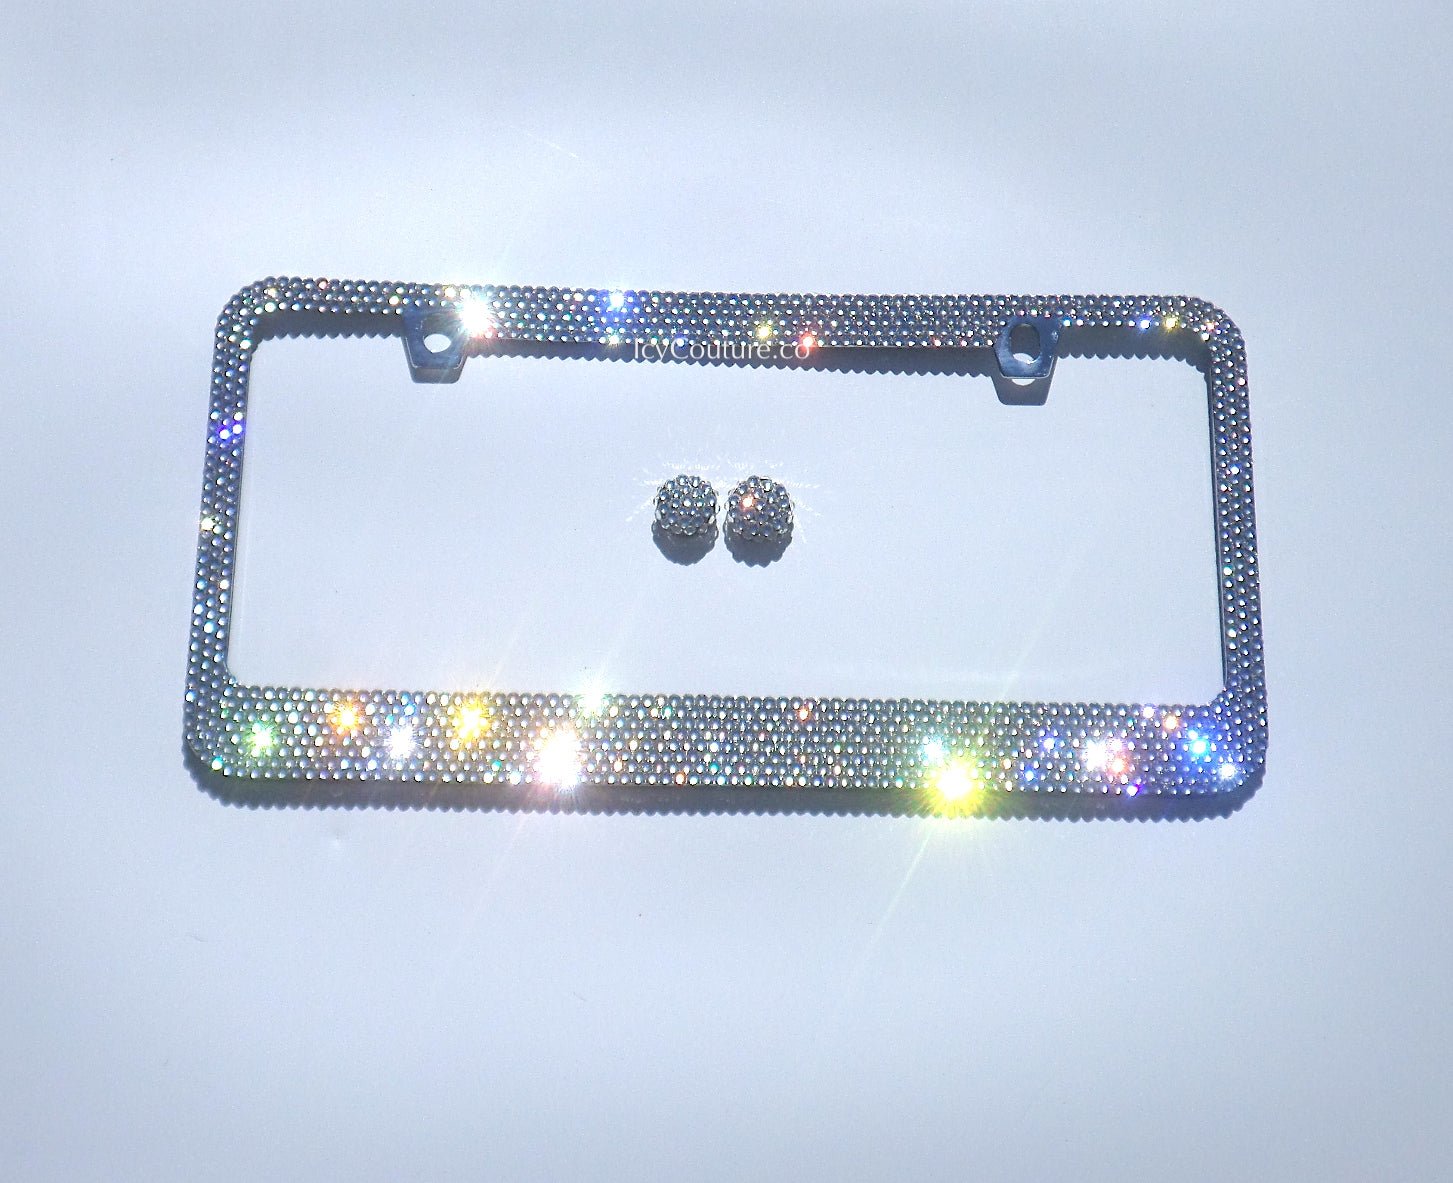 Super Sparkling Diamond Clear Swarovski Crystals License Plate Frame, Crystallized by ICY Couture